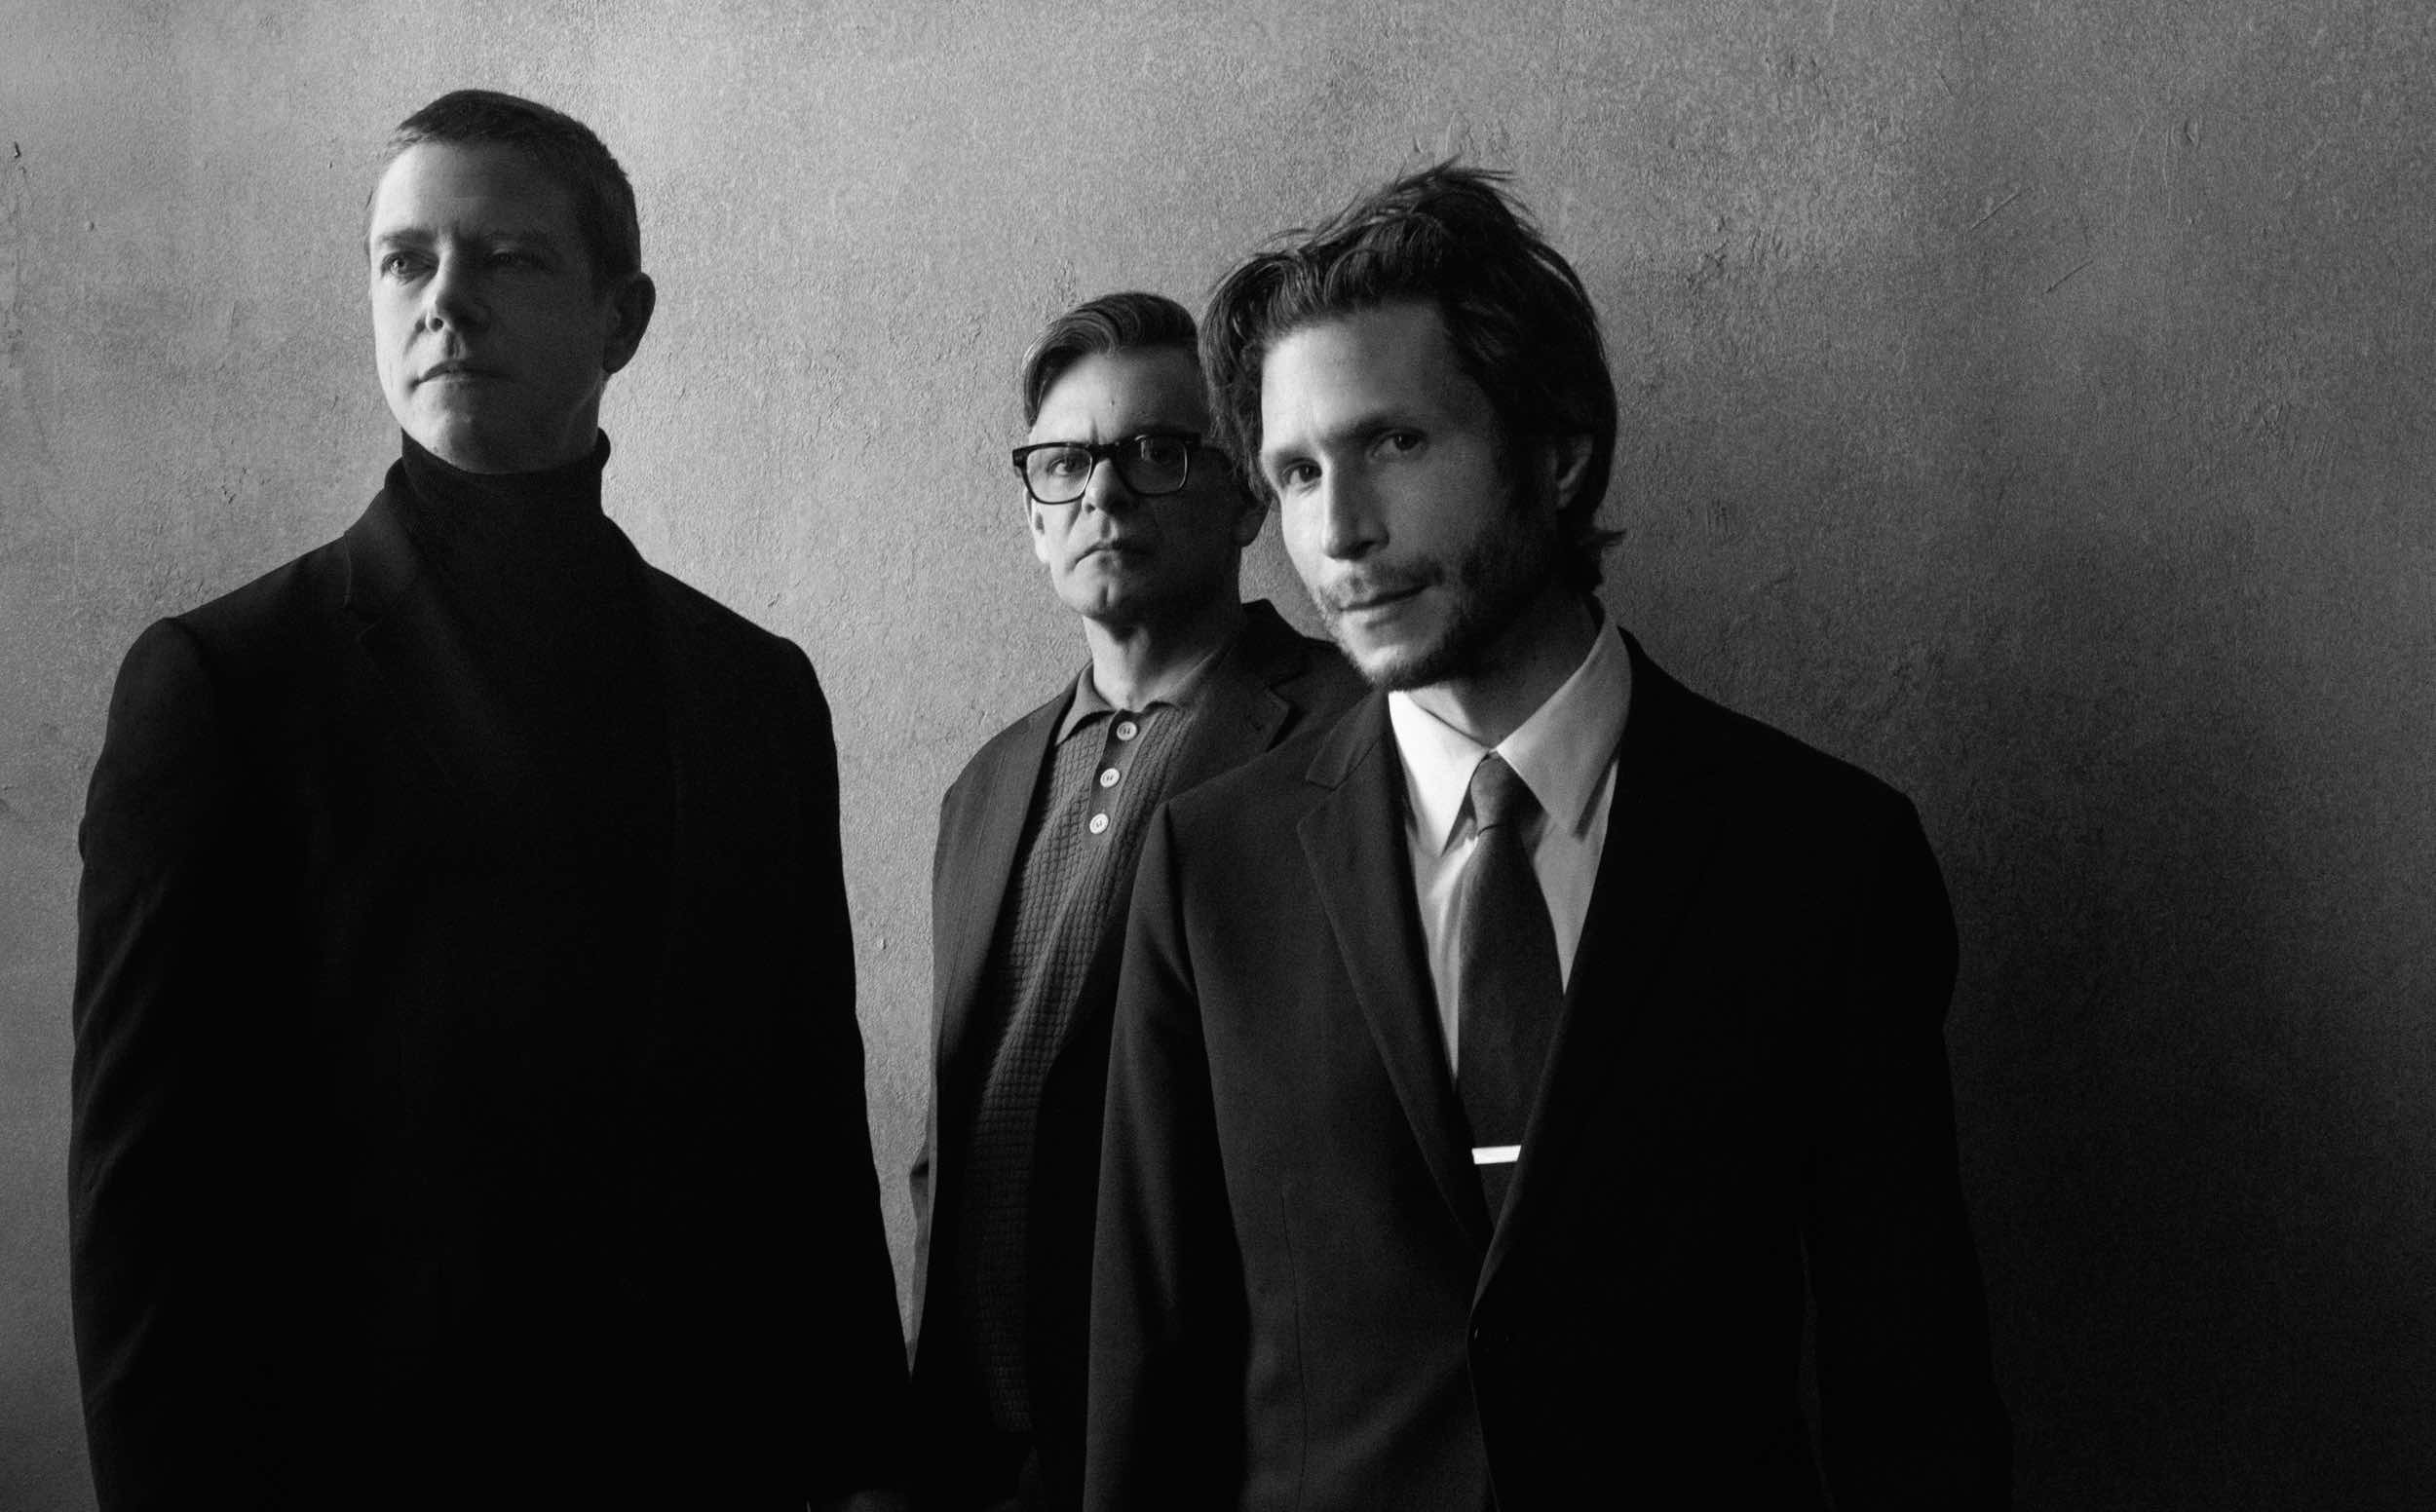 FLOOD - Interpol on Avoiding the Traps of Pessimism on “The Other Side ...